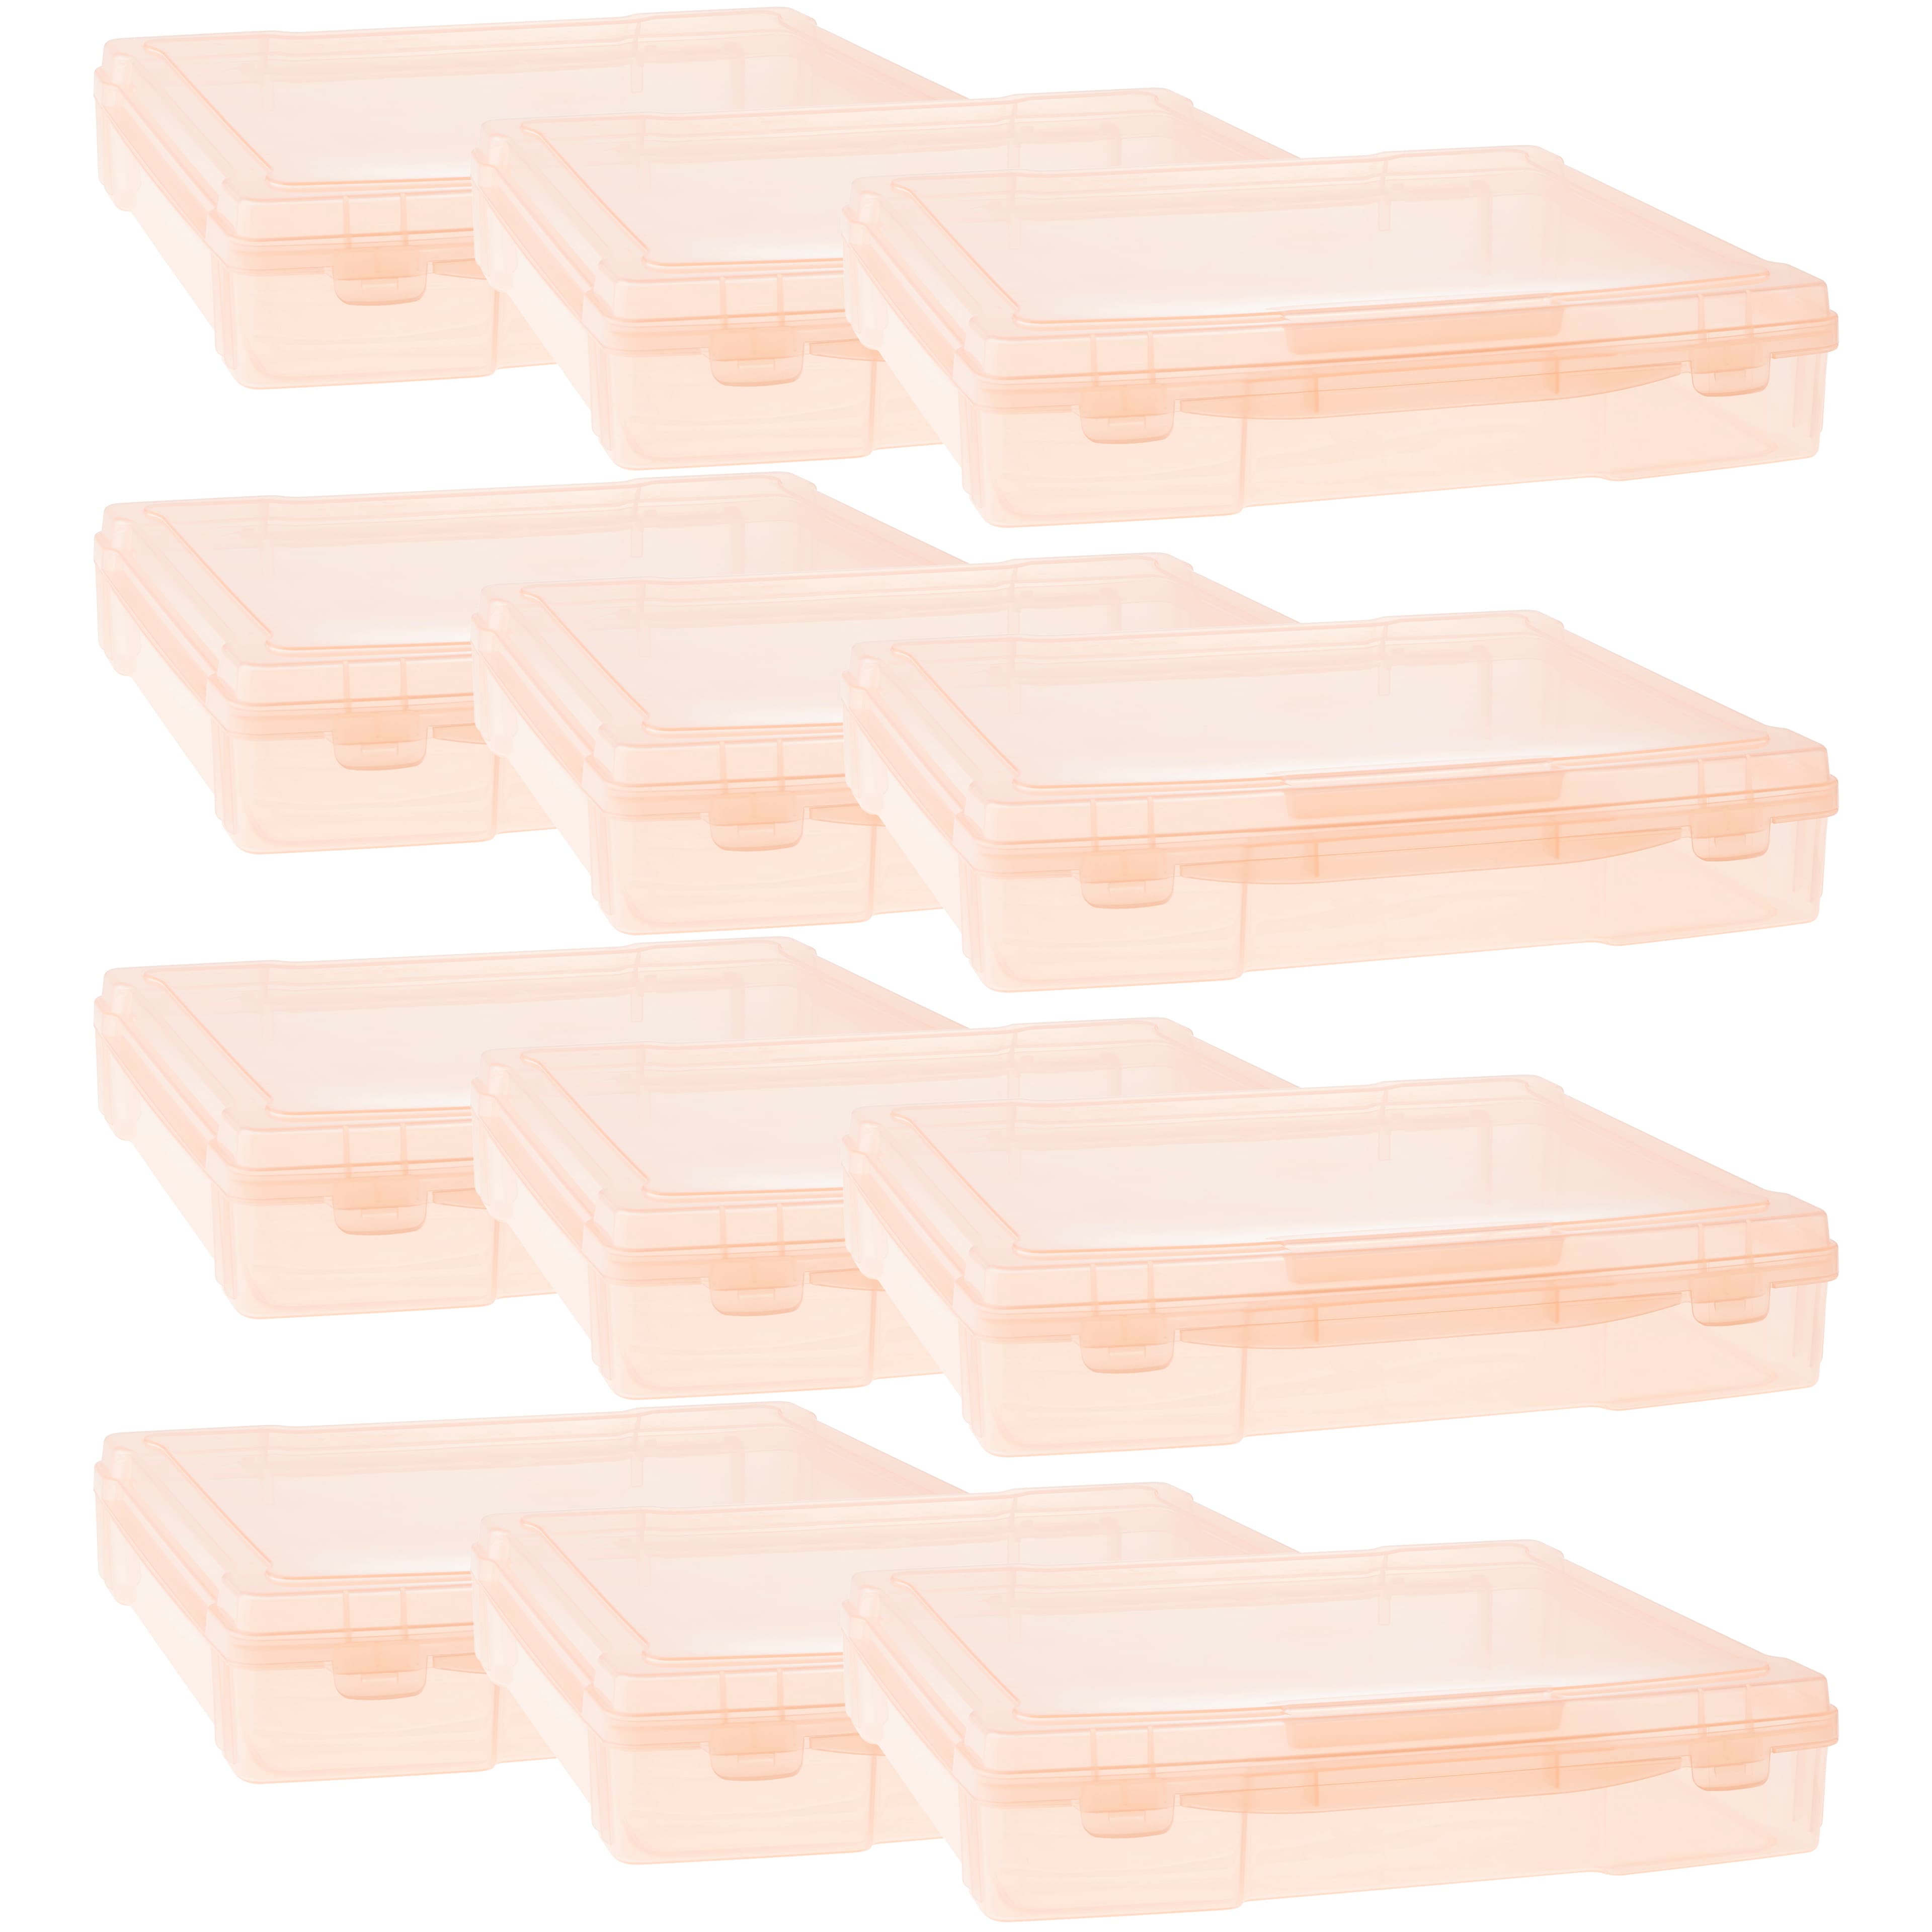 12” x 12” Plastic Scrapbook Storage Case by Simply Tidy- Portable Case for  Documents, Papers, Sewing, Crafts - Bulk 12 Pack 